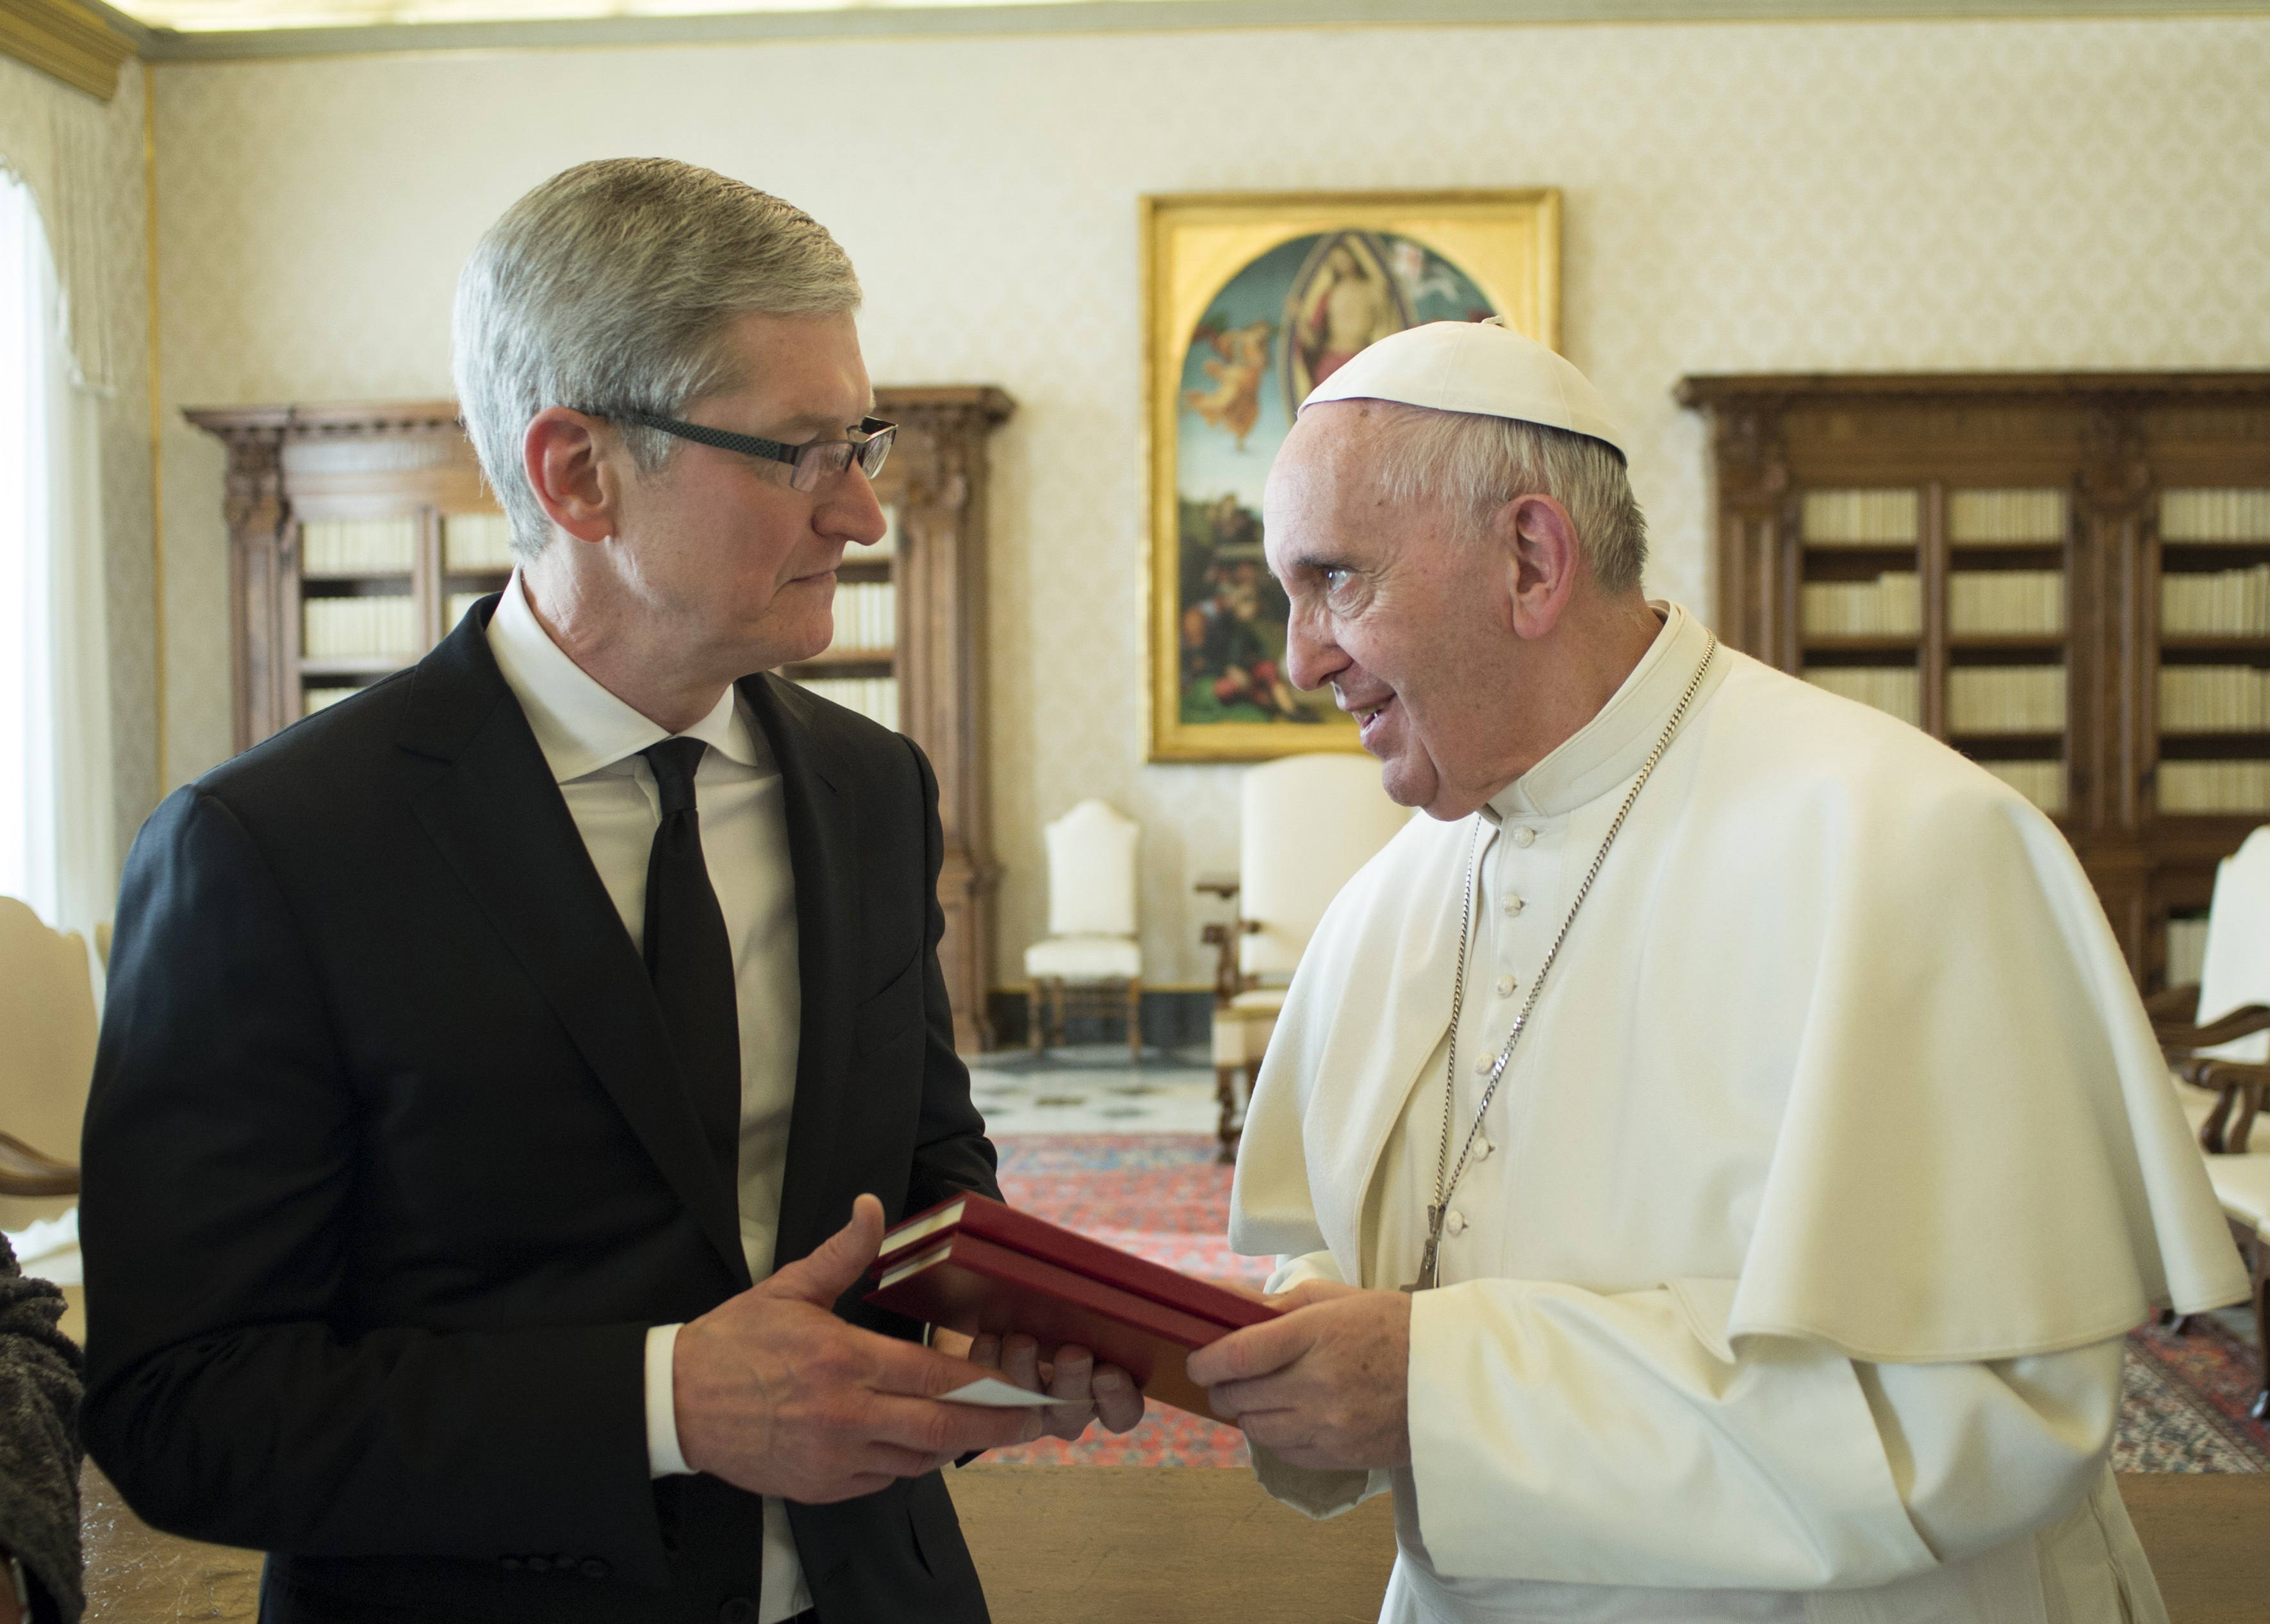 Pope Francis meets with Apple CEO Tim Cook at the Vatican on Jan. 22, 2016.